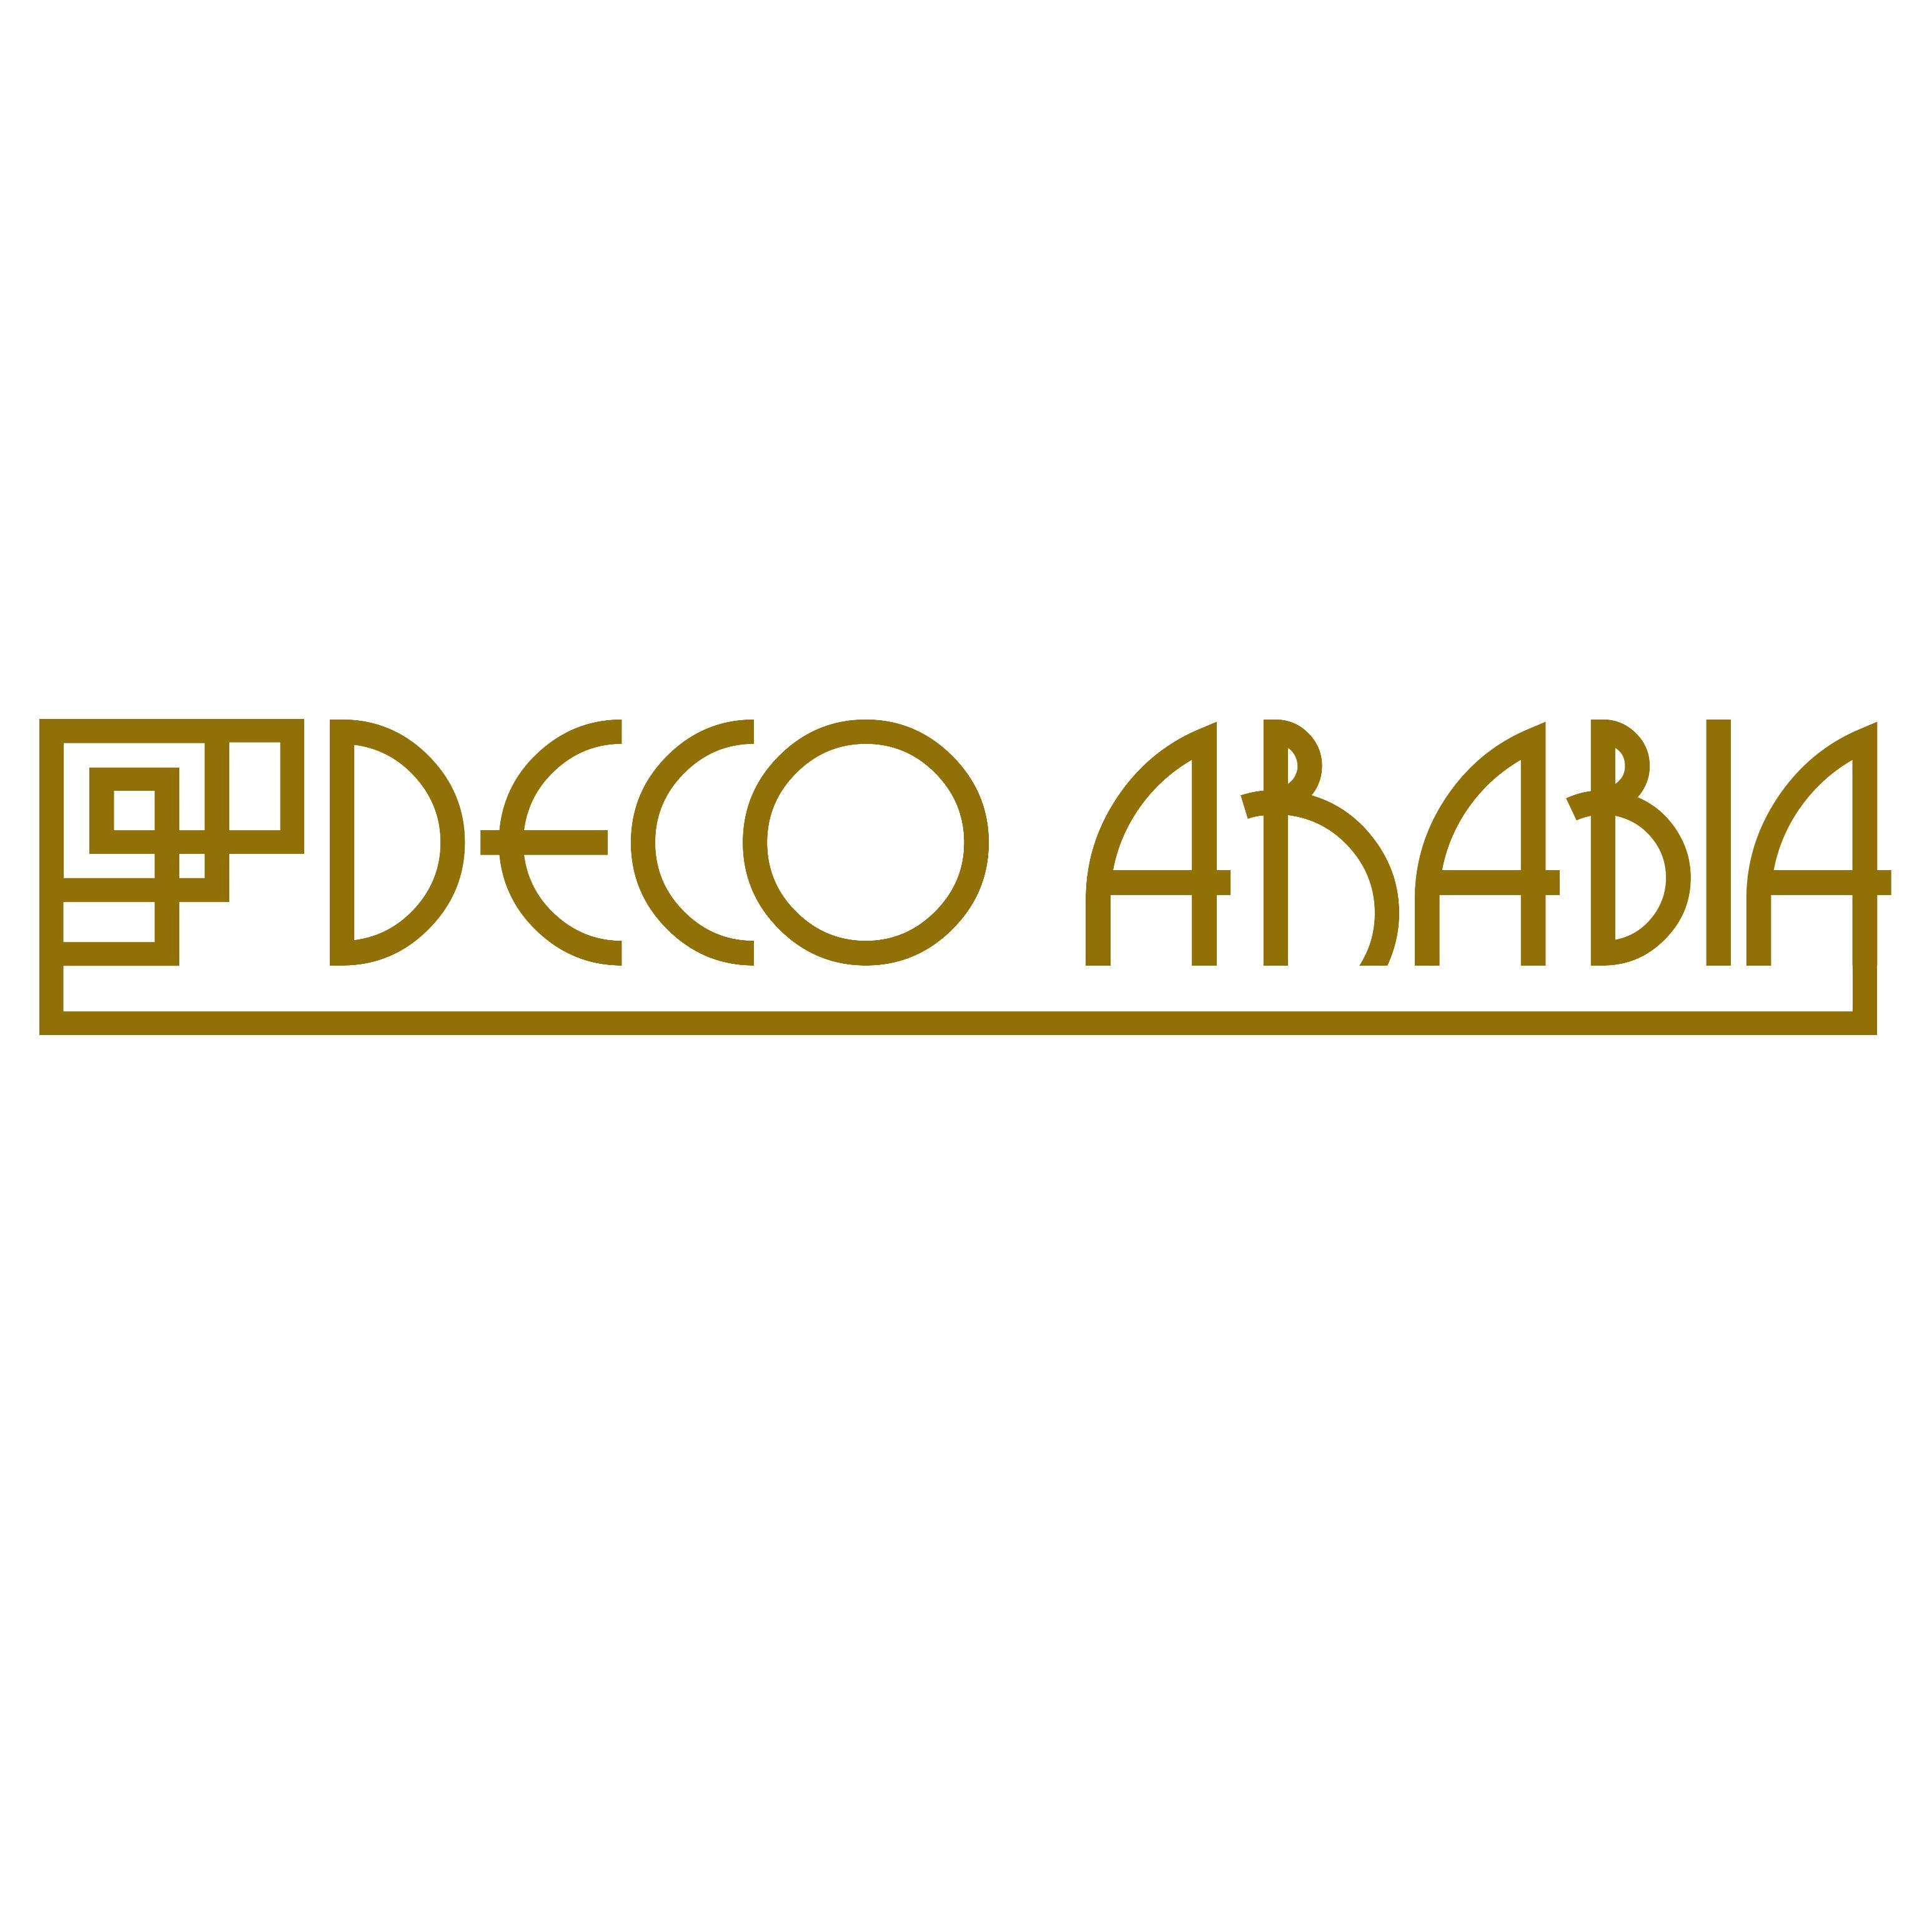 Deco Arabia is a collection of Photographs and screenprints of Dubai's most beautiful buildings, skyscrapers and hotels inspired by 1920s Art Deco movement.